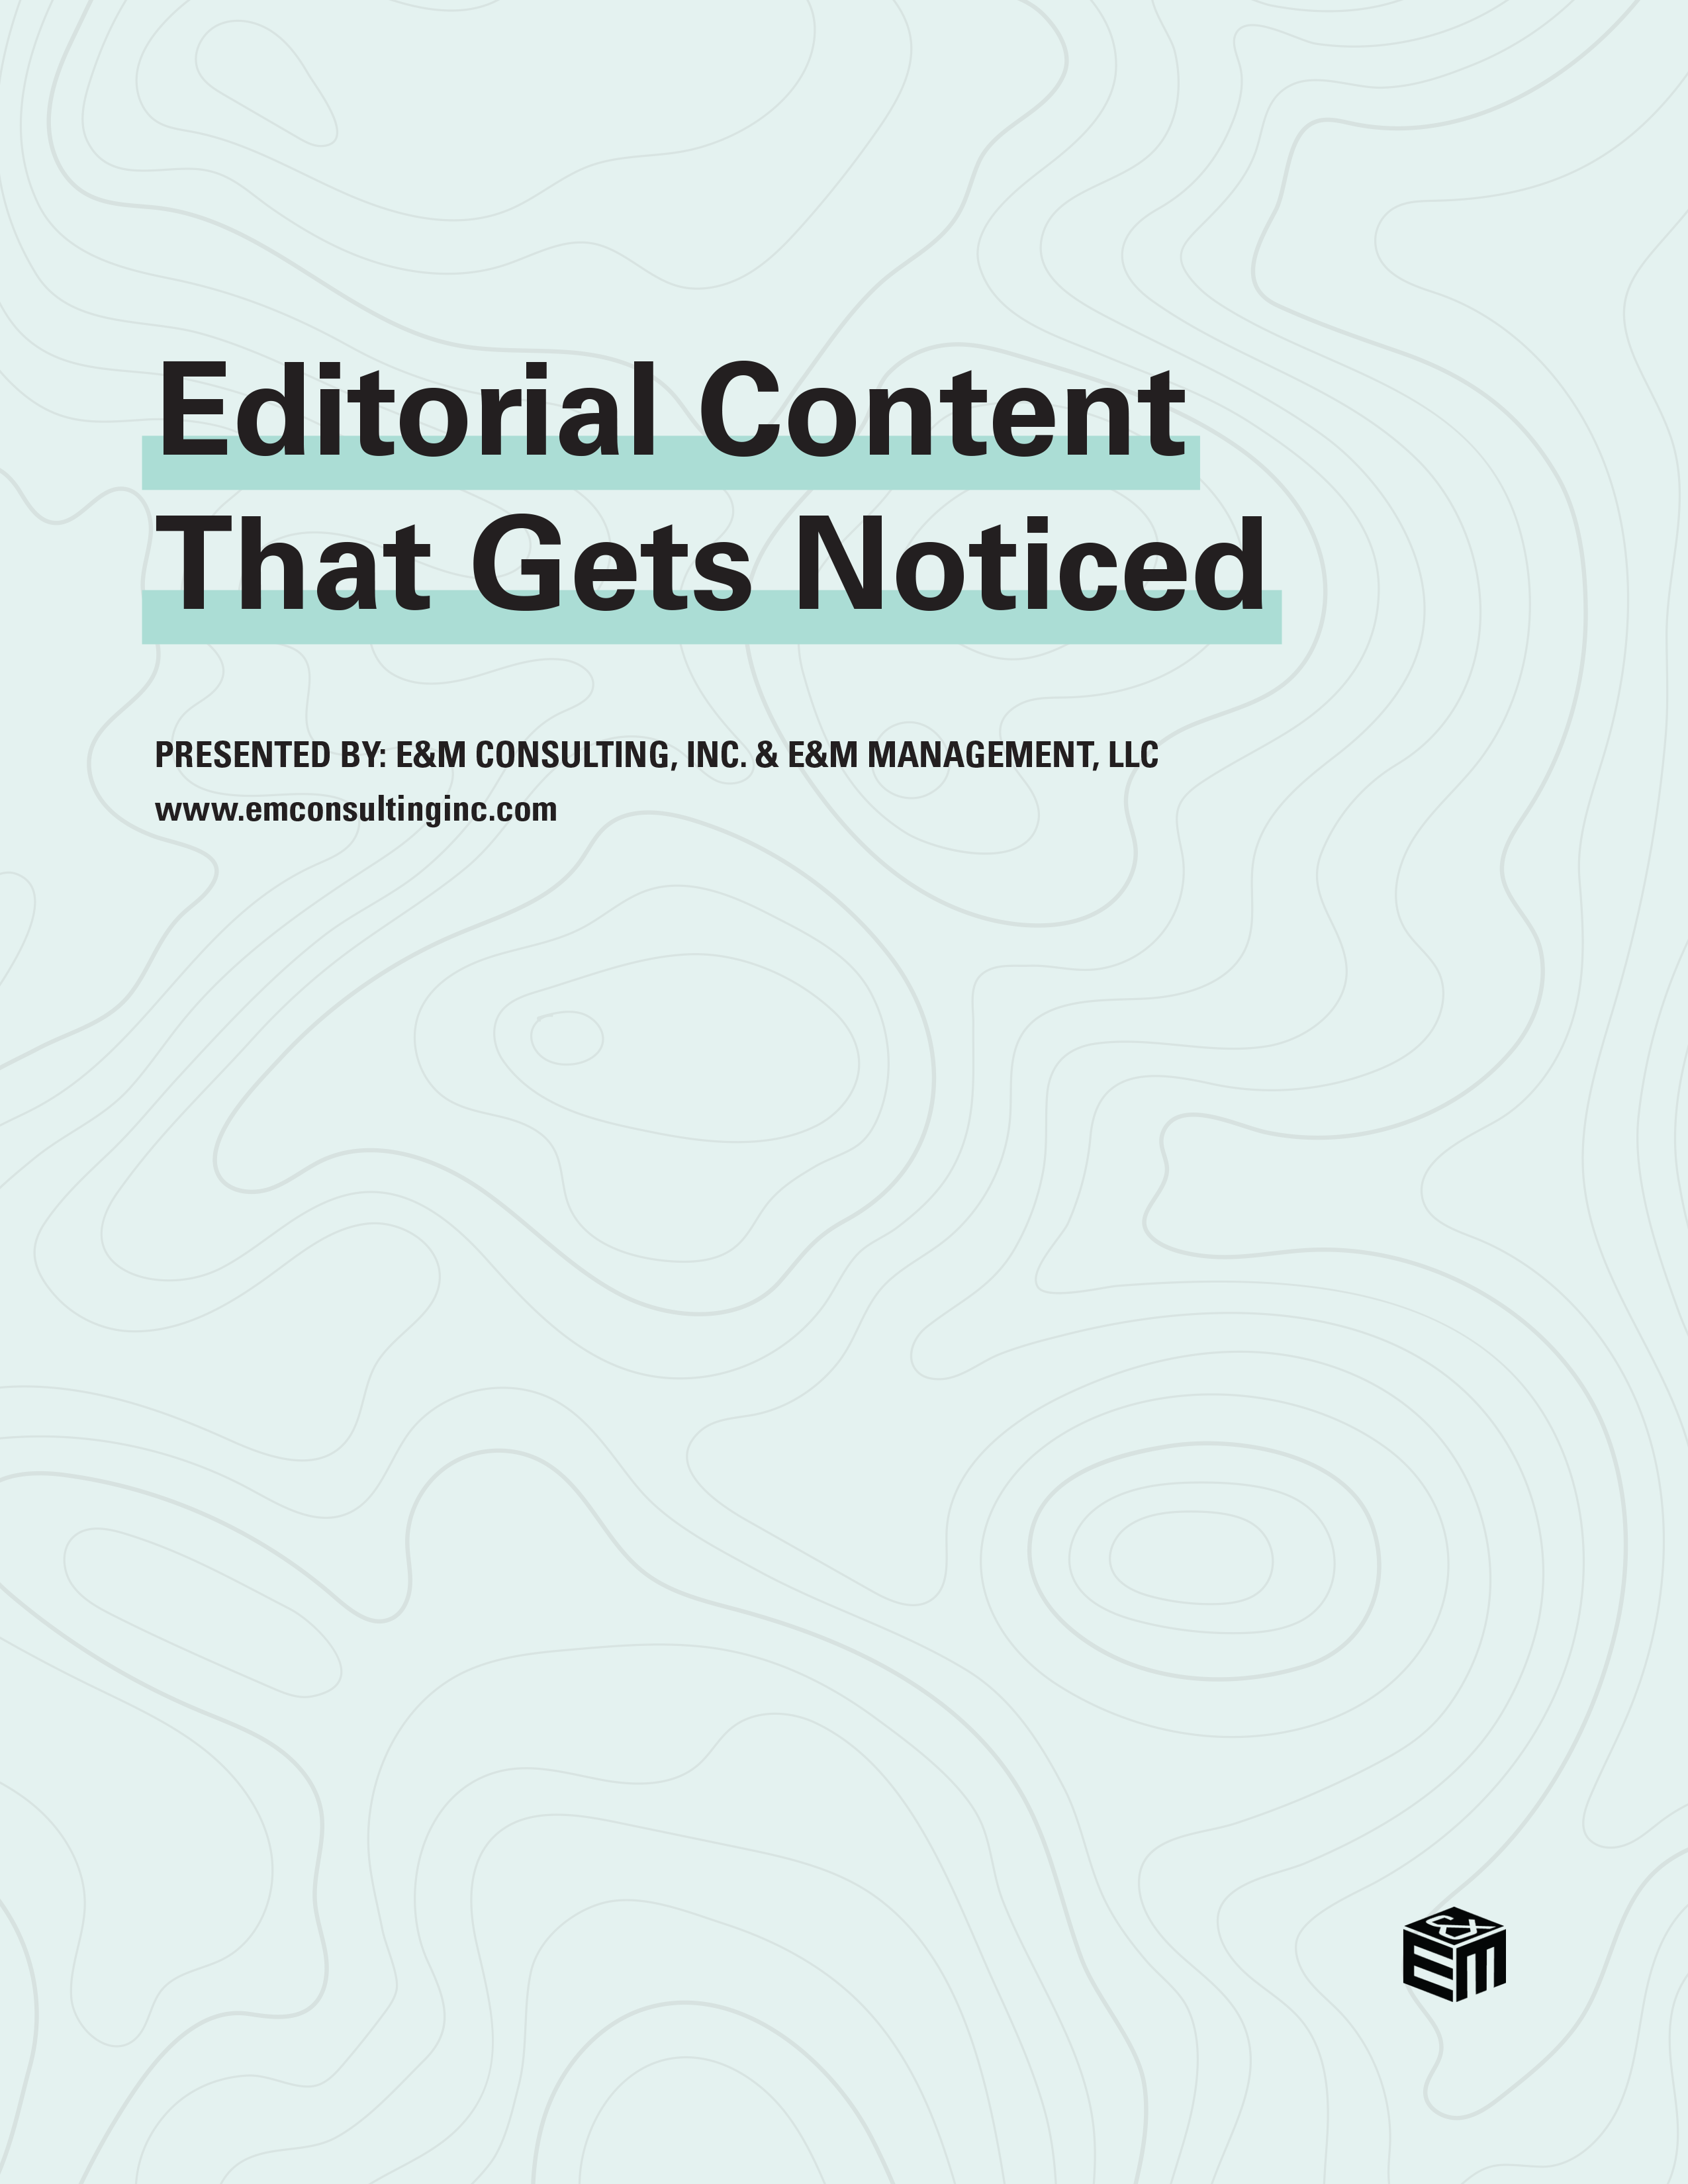 Editorial Content that Gets Noticed